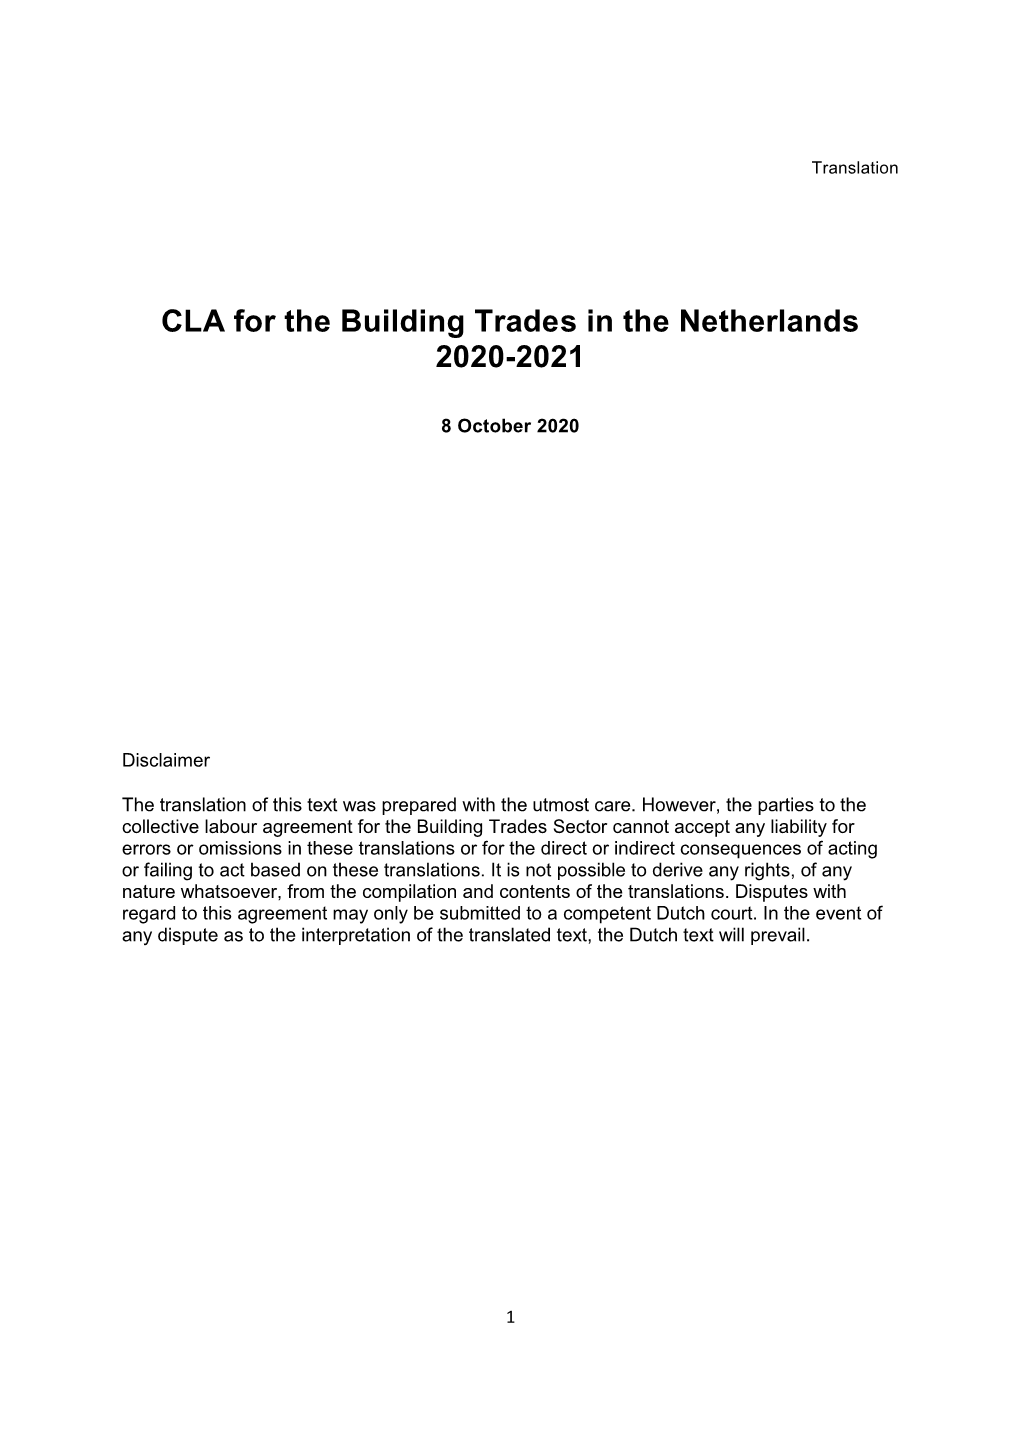 CLA for the Building Trades in the Netherlands 2020-2021